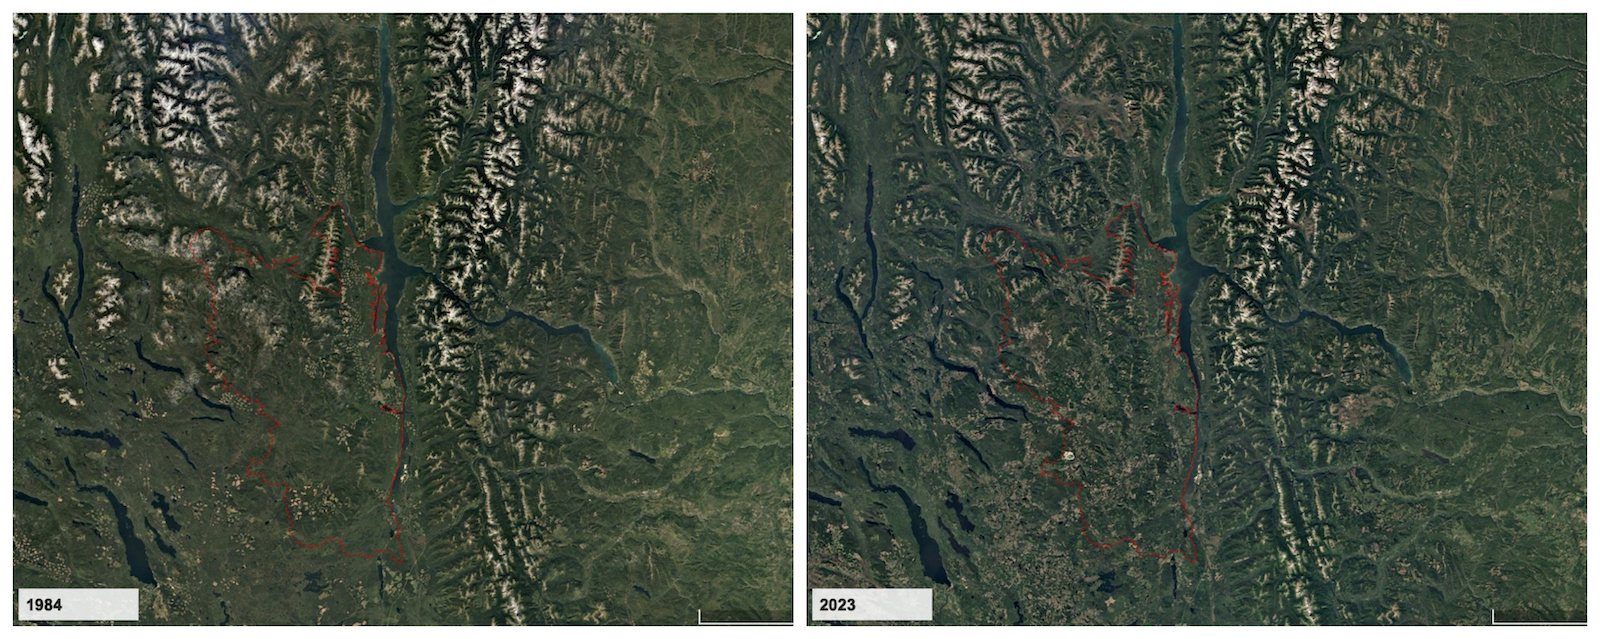 On the left, an area of land with a red border is pictured as fairly green and treed in 1984. On the right, the area within the border is far less green, and more denuded and grey.